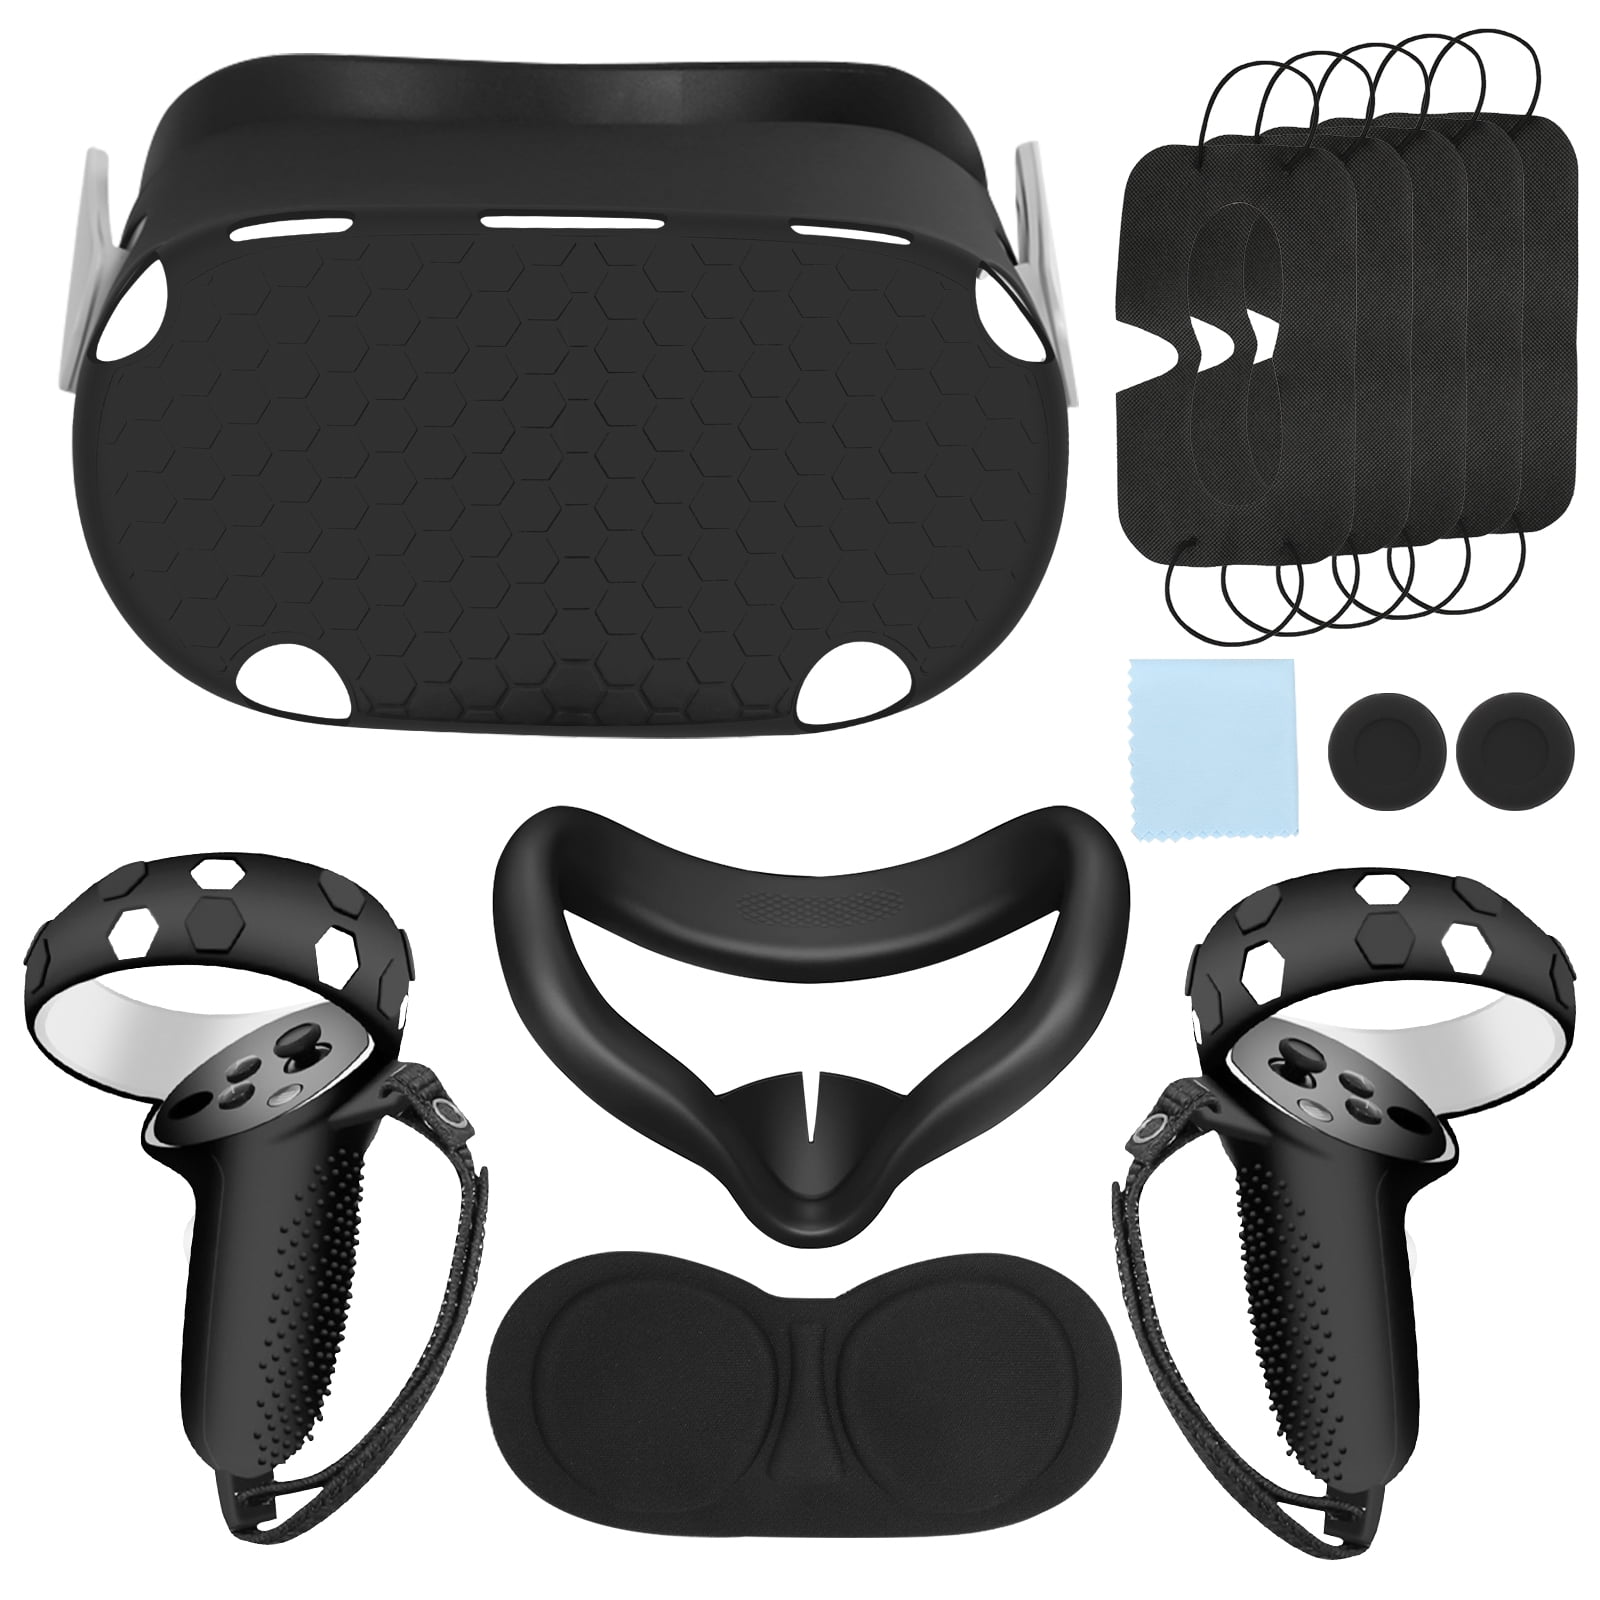 TSV 10-in-1 VR Accessories Set Fit for Oculus 2 wirh Touch Controller Grips Cover, Silicone Face Cover Fit for Oculus Quest 2, VR Lens Protective Cover, VR Shell Cover, Disposable Eye